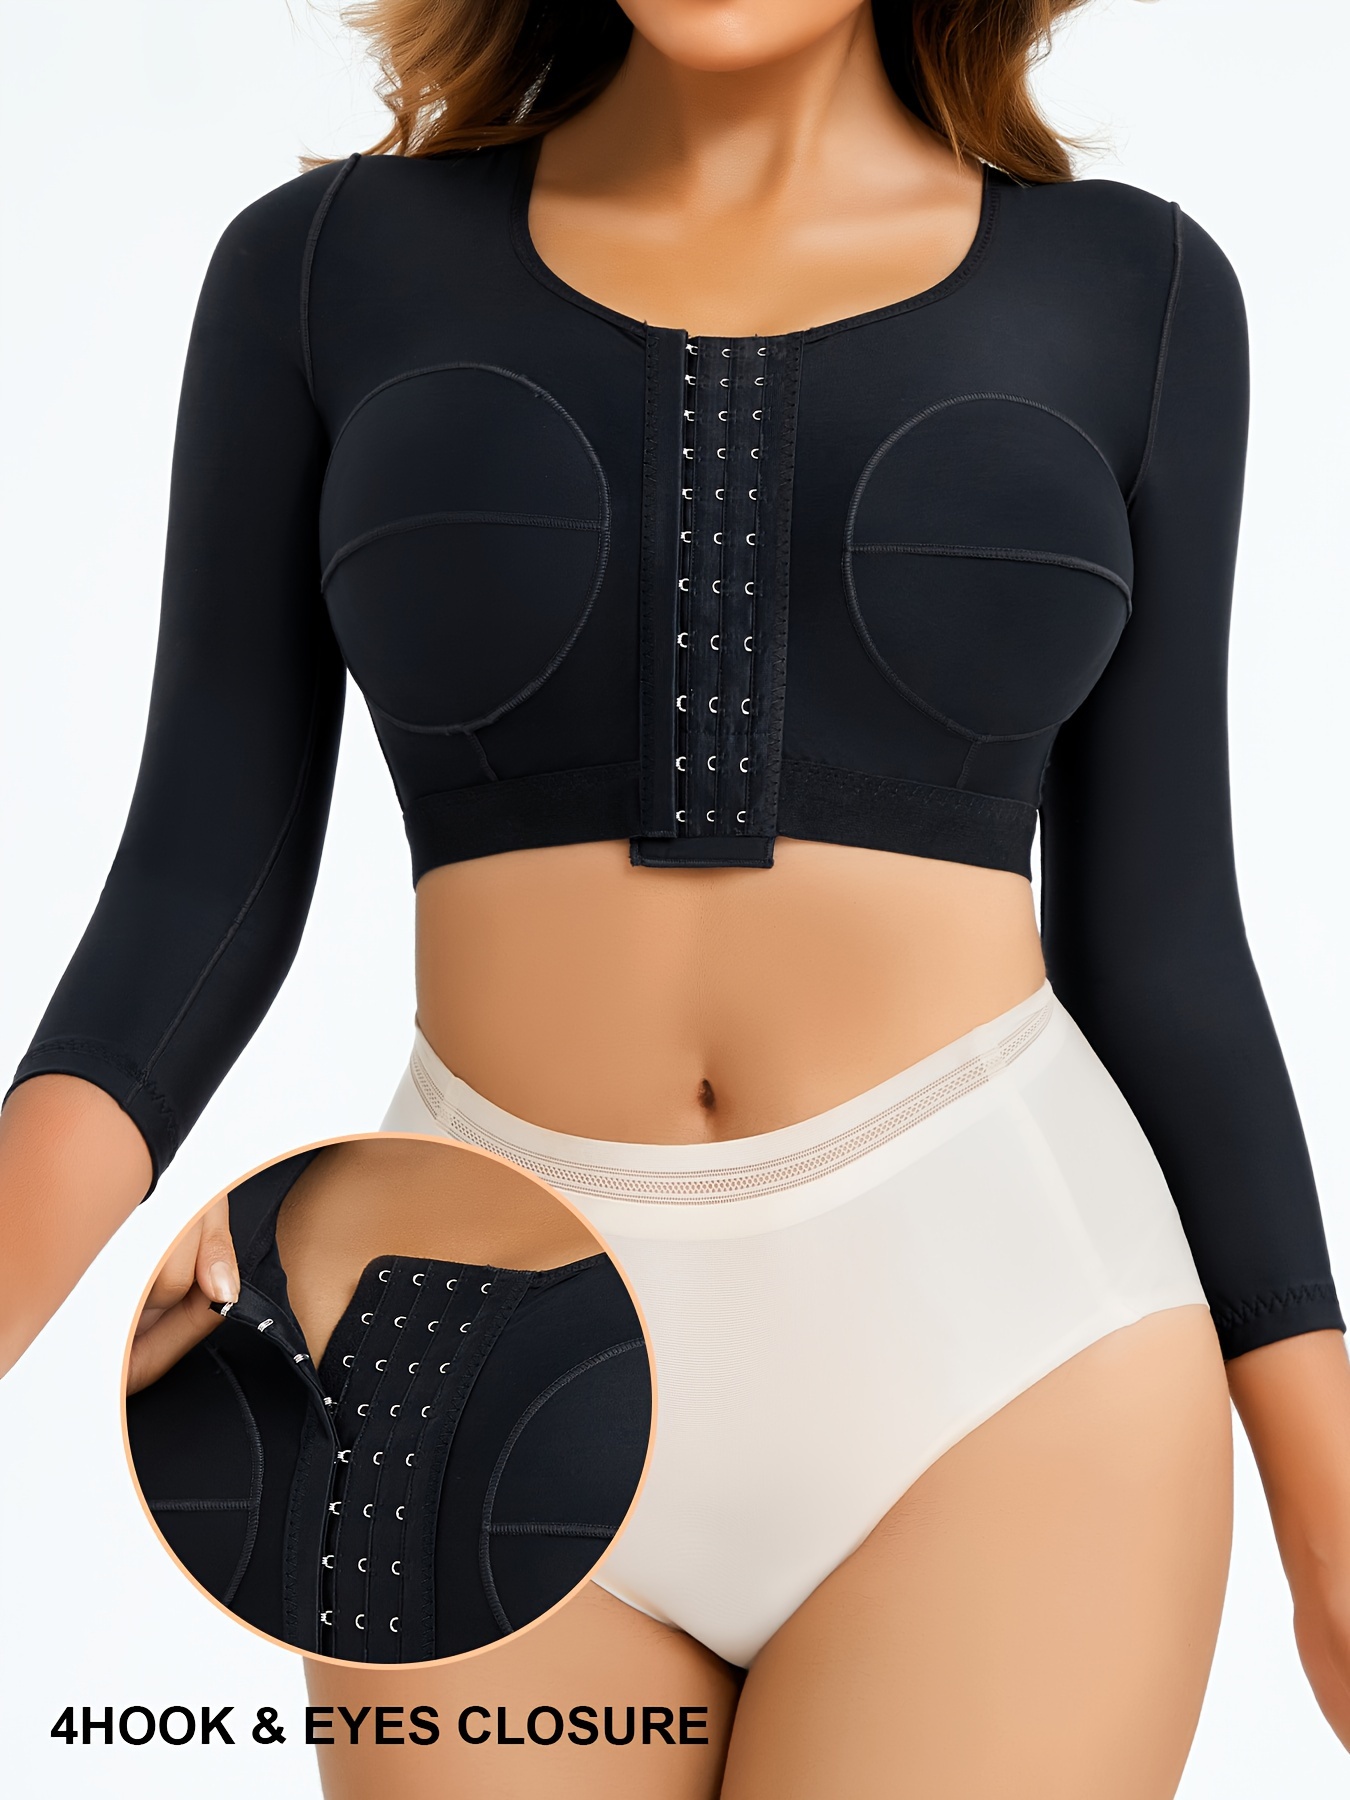 Womens Posture Girdle Shapewear With Compression Sleeves For Waist